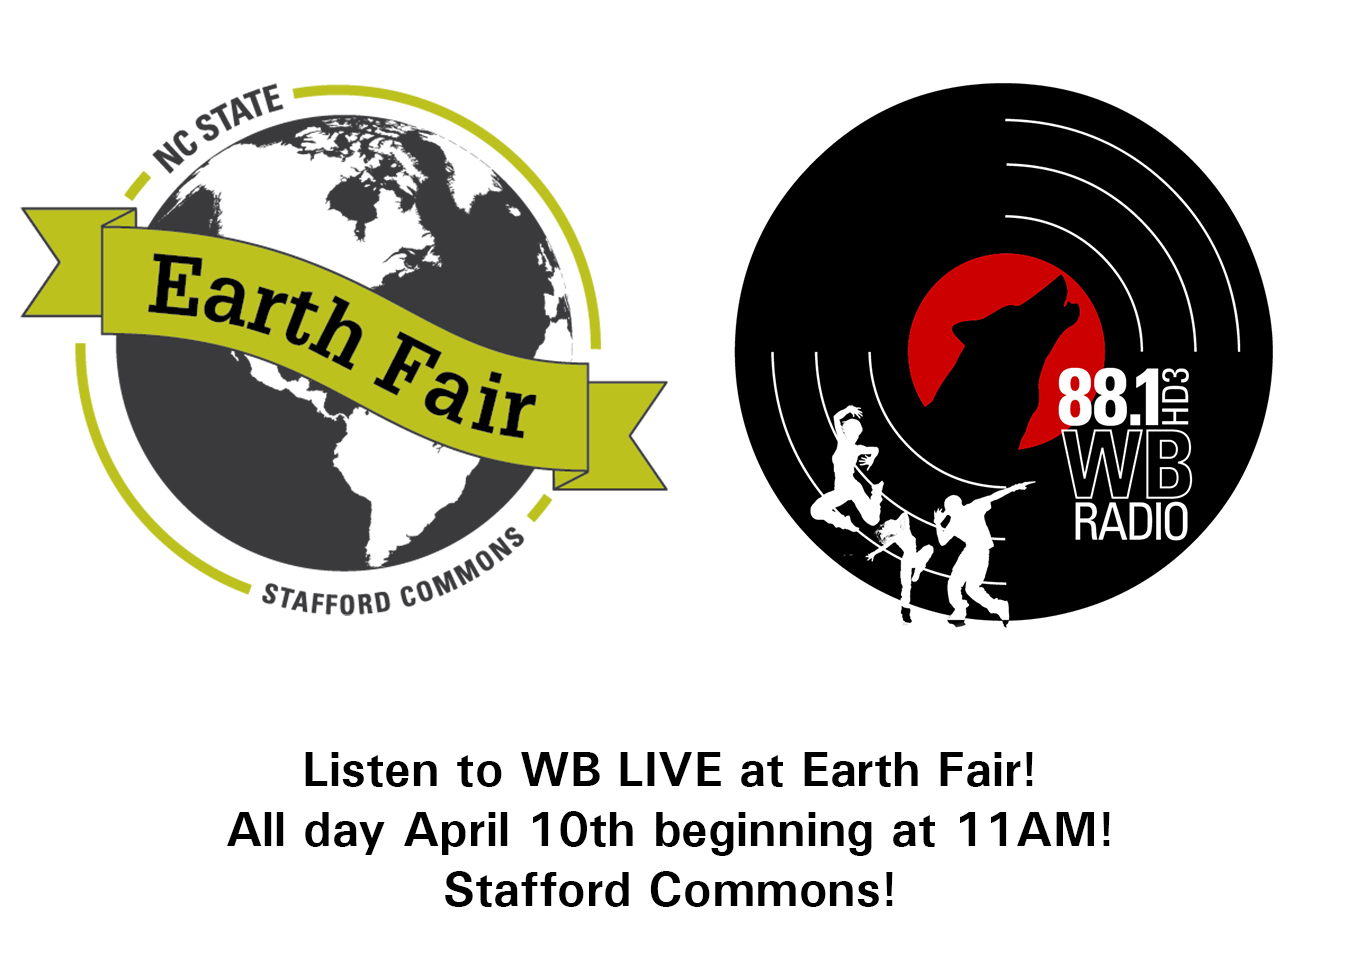 Listen to WB LIVE at Earth Fair!  All day April 10th beginning at 11AM at Stafford Commons!